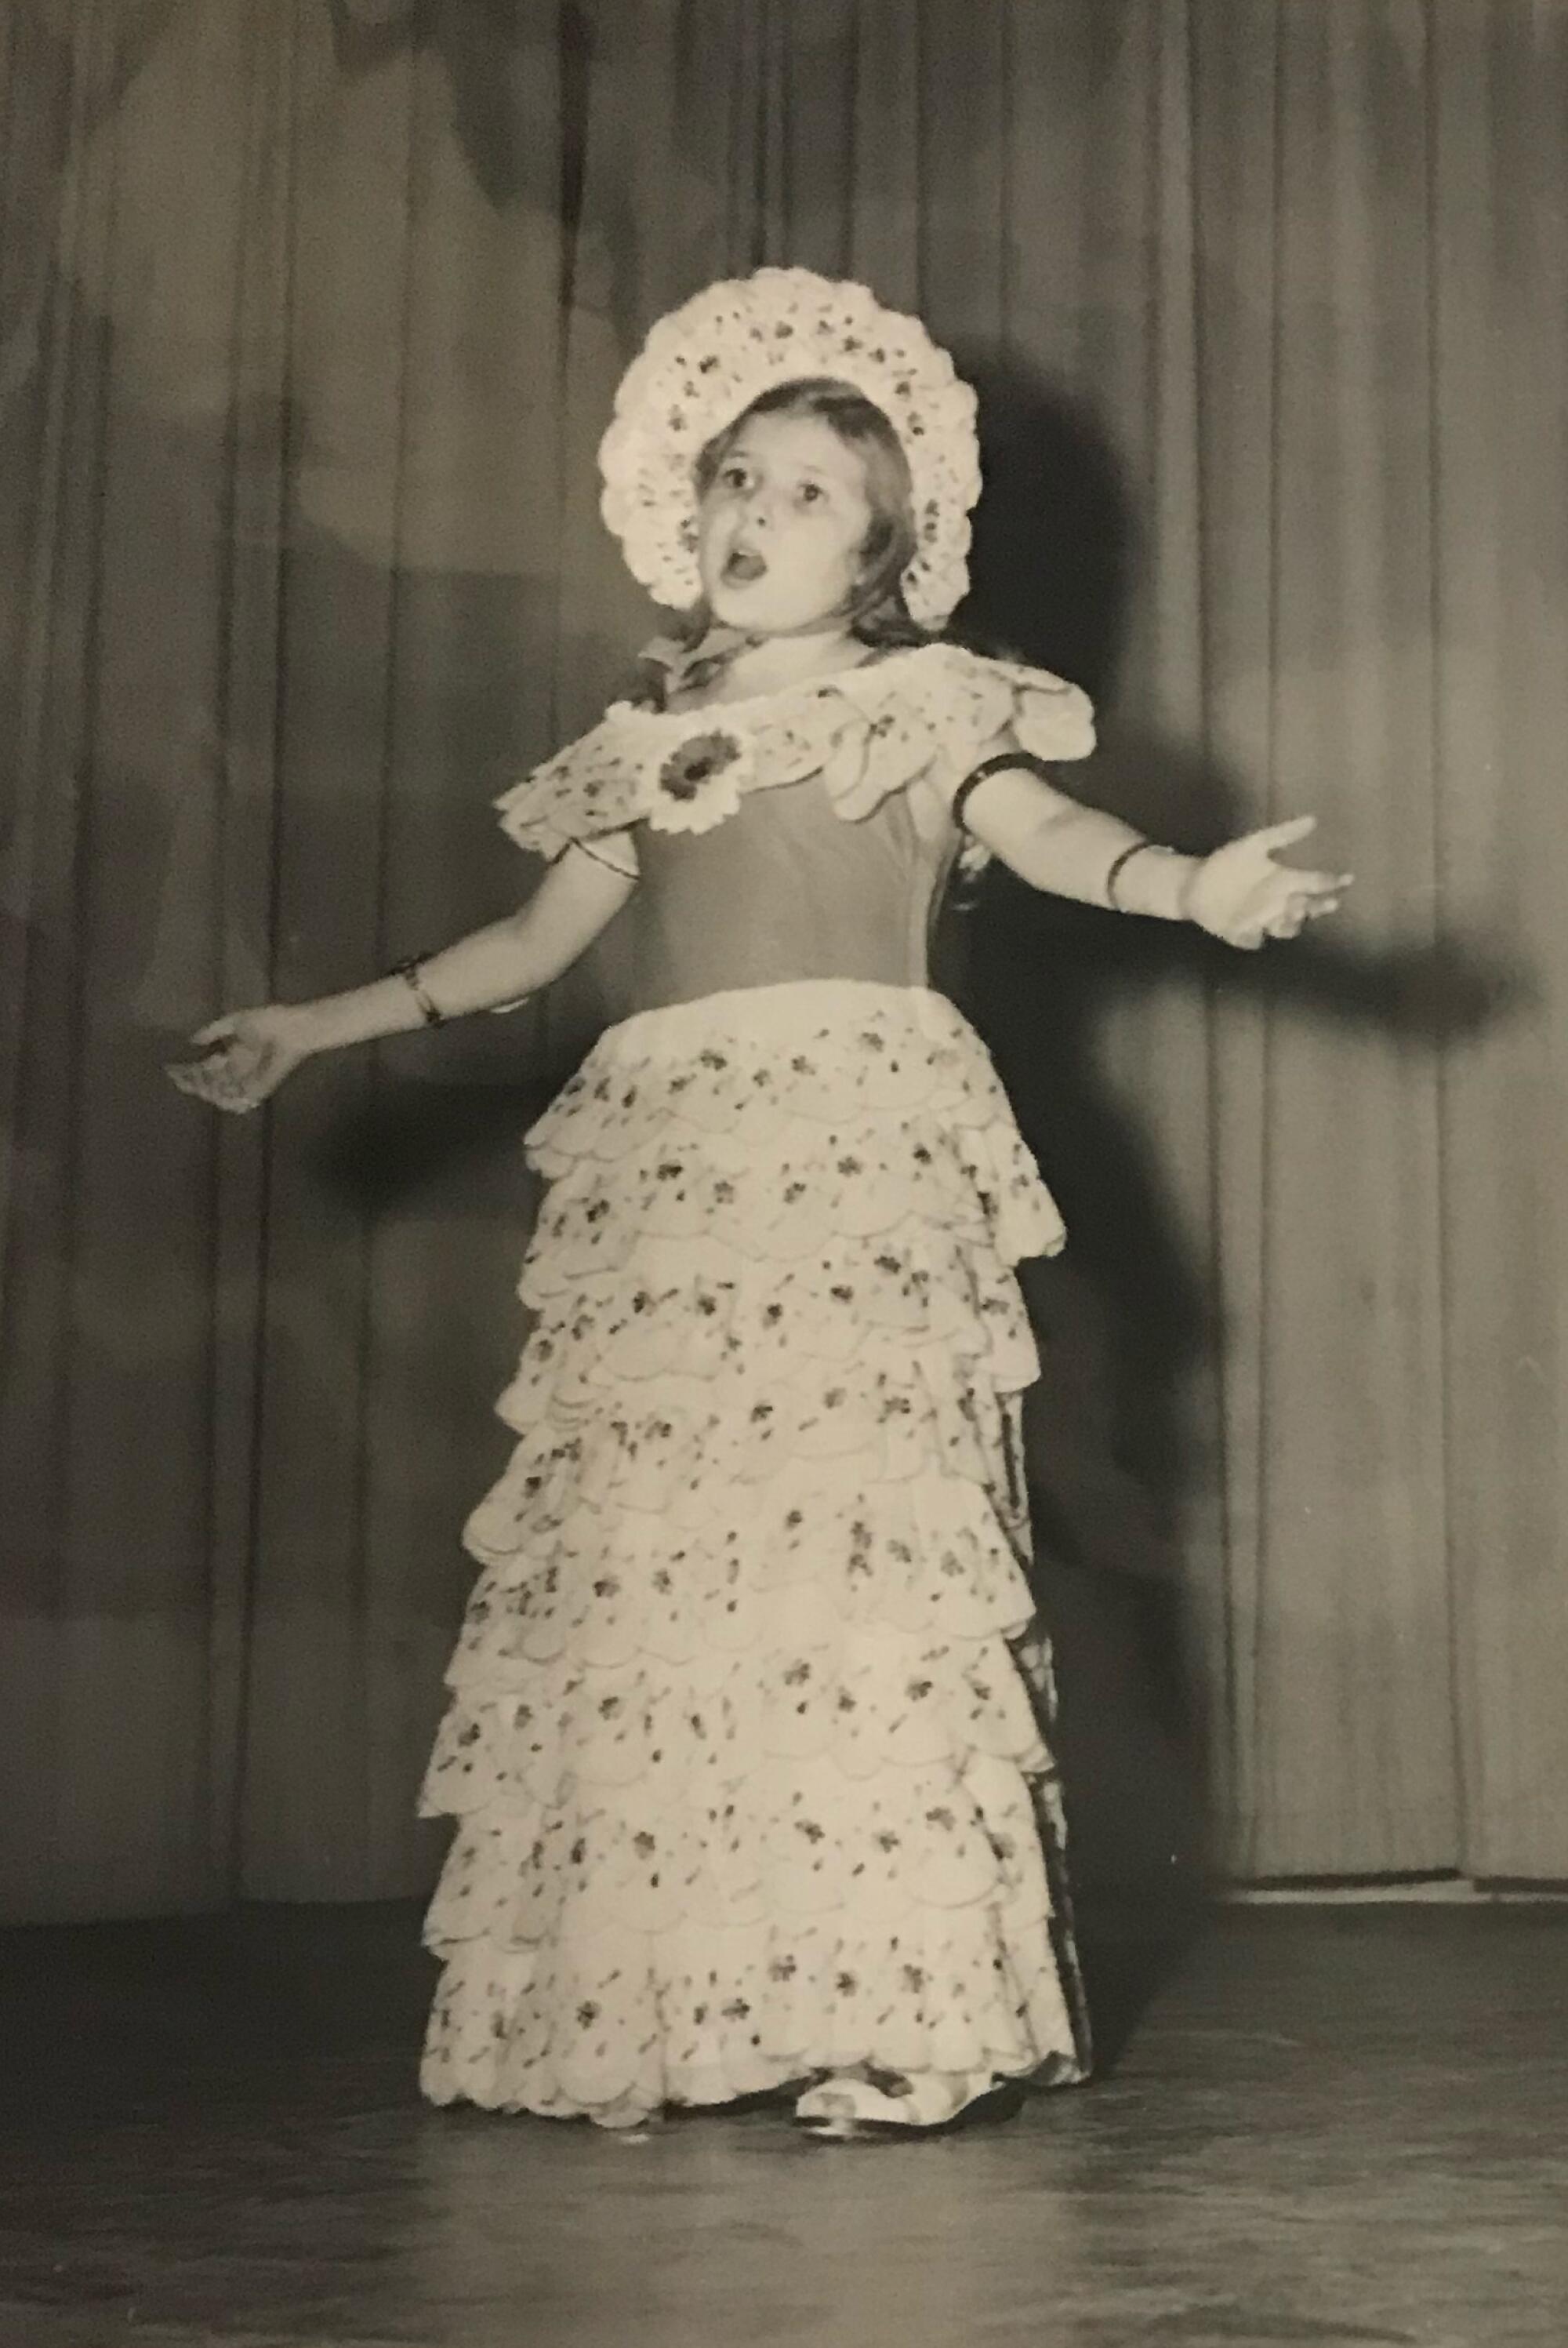 A girl in a dress and bonnet performs on a stage.